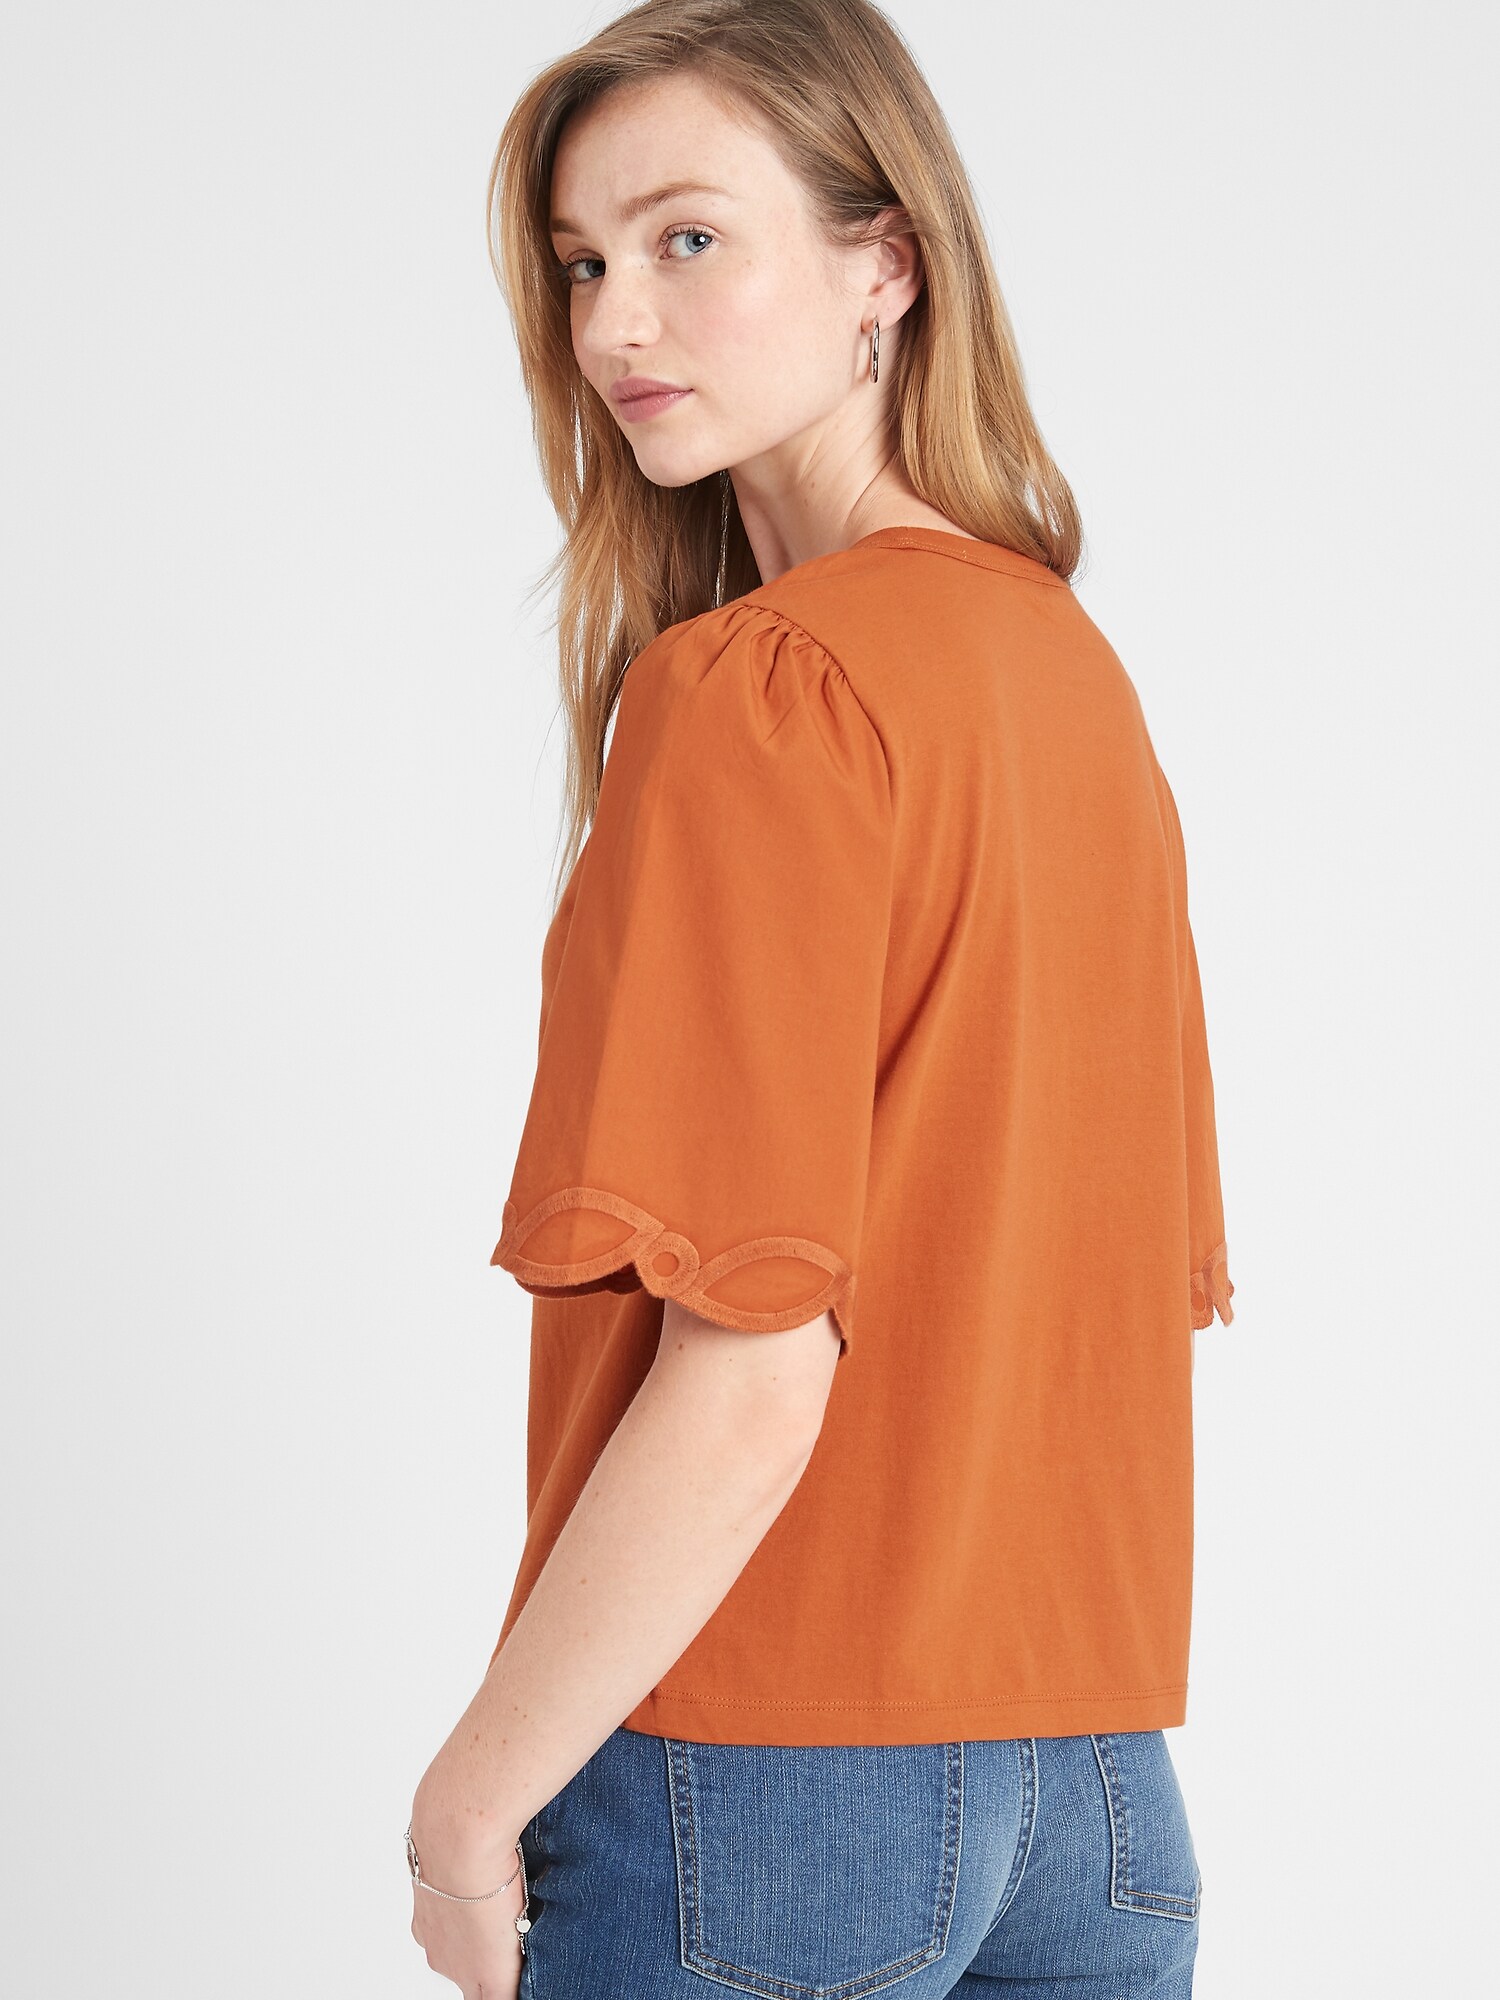 Embroidered-Sleeve T-Shirt